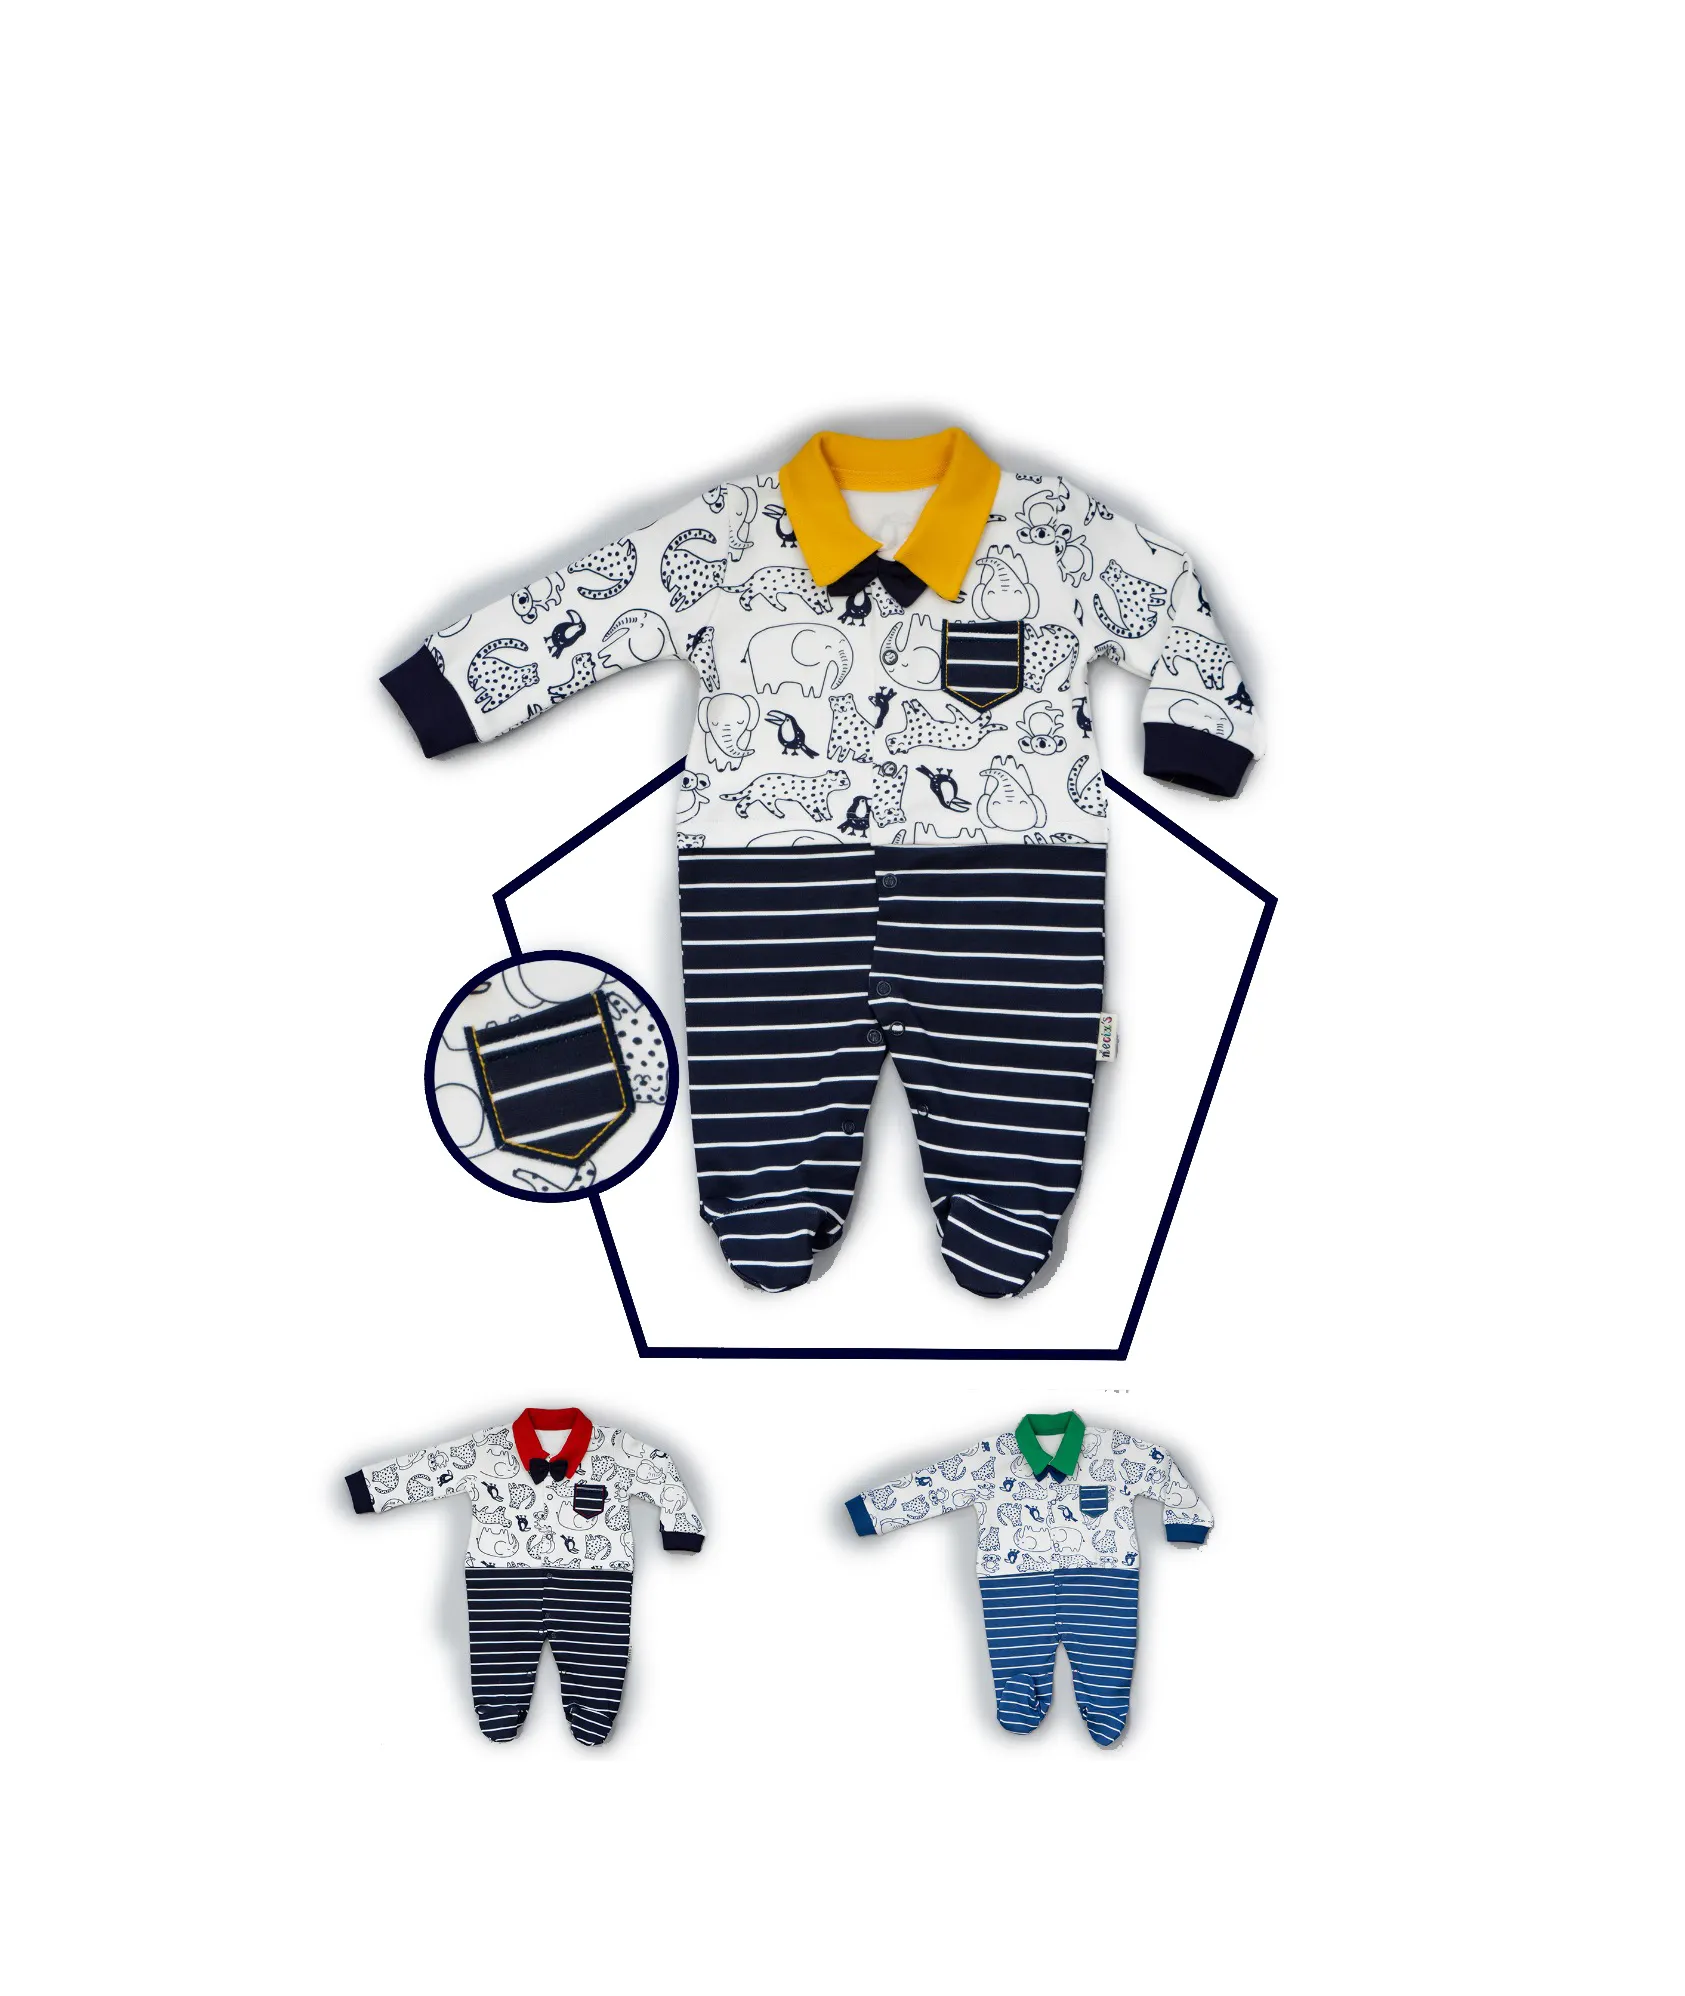 Hot Sale ! Animal Figures Sweater Designed Baby Boys' Rompers Spring Soft Cotton Baby Clothes By Necix's Brand